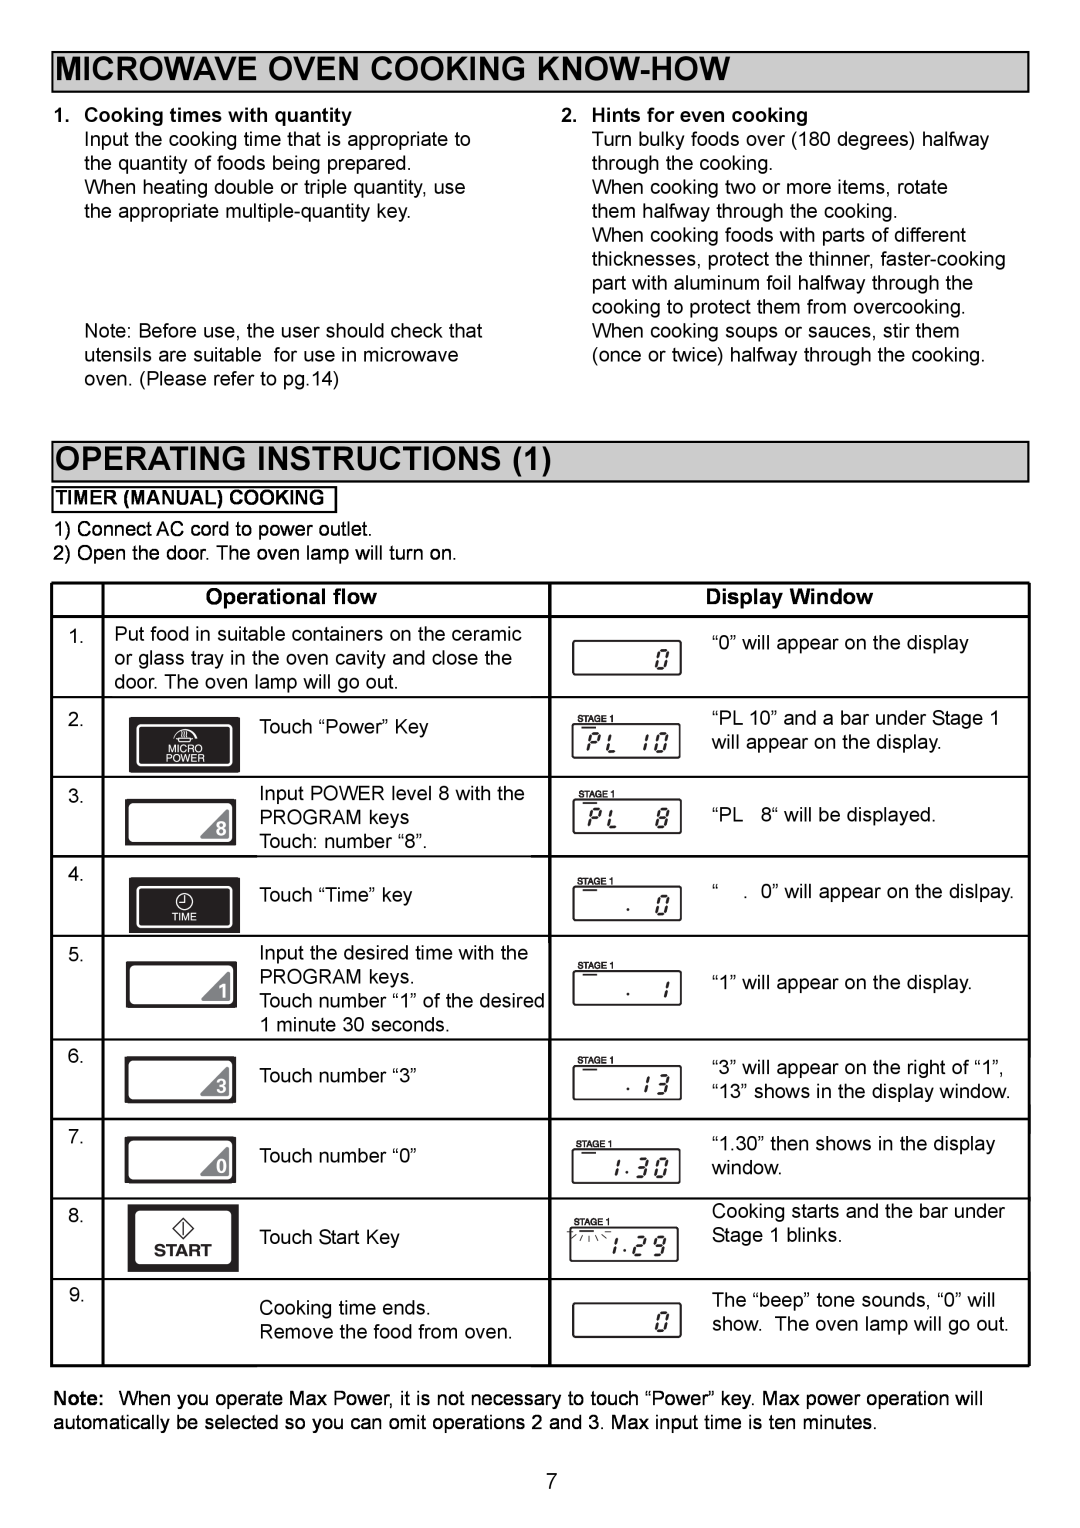 Sanyo EM-S1000 instruction manual Microwave Oven Cooking Know-How, Operating Instructions, Operational flow, Display Window 